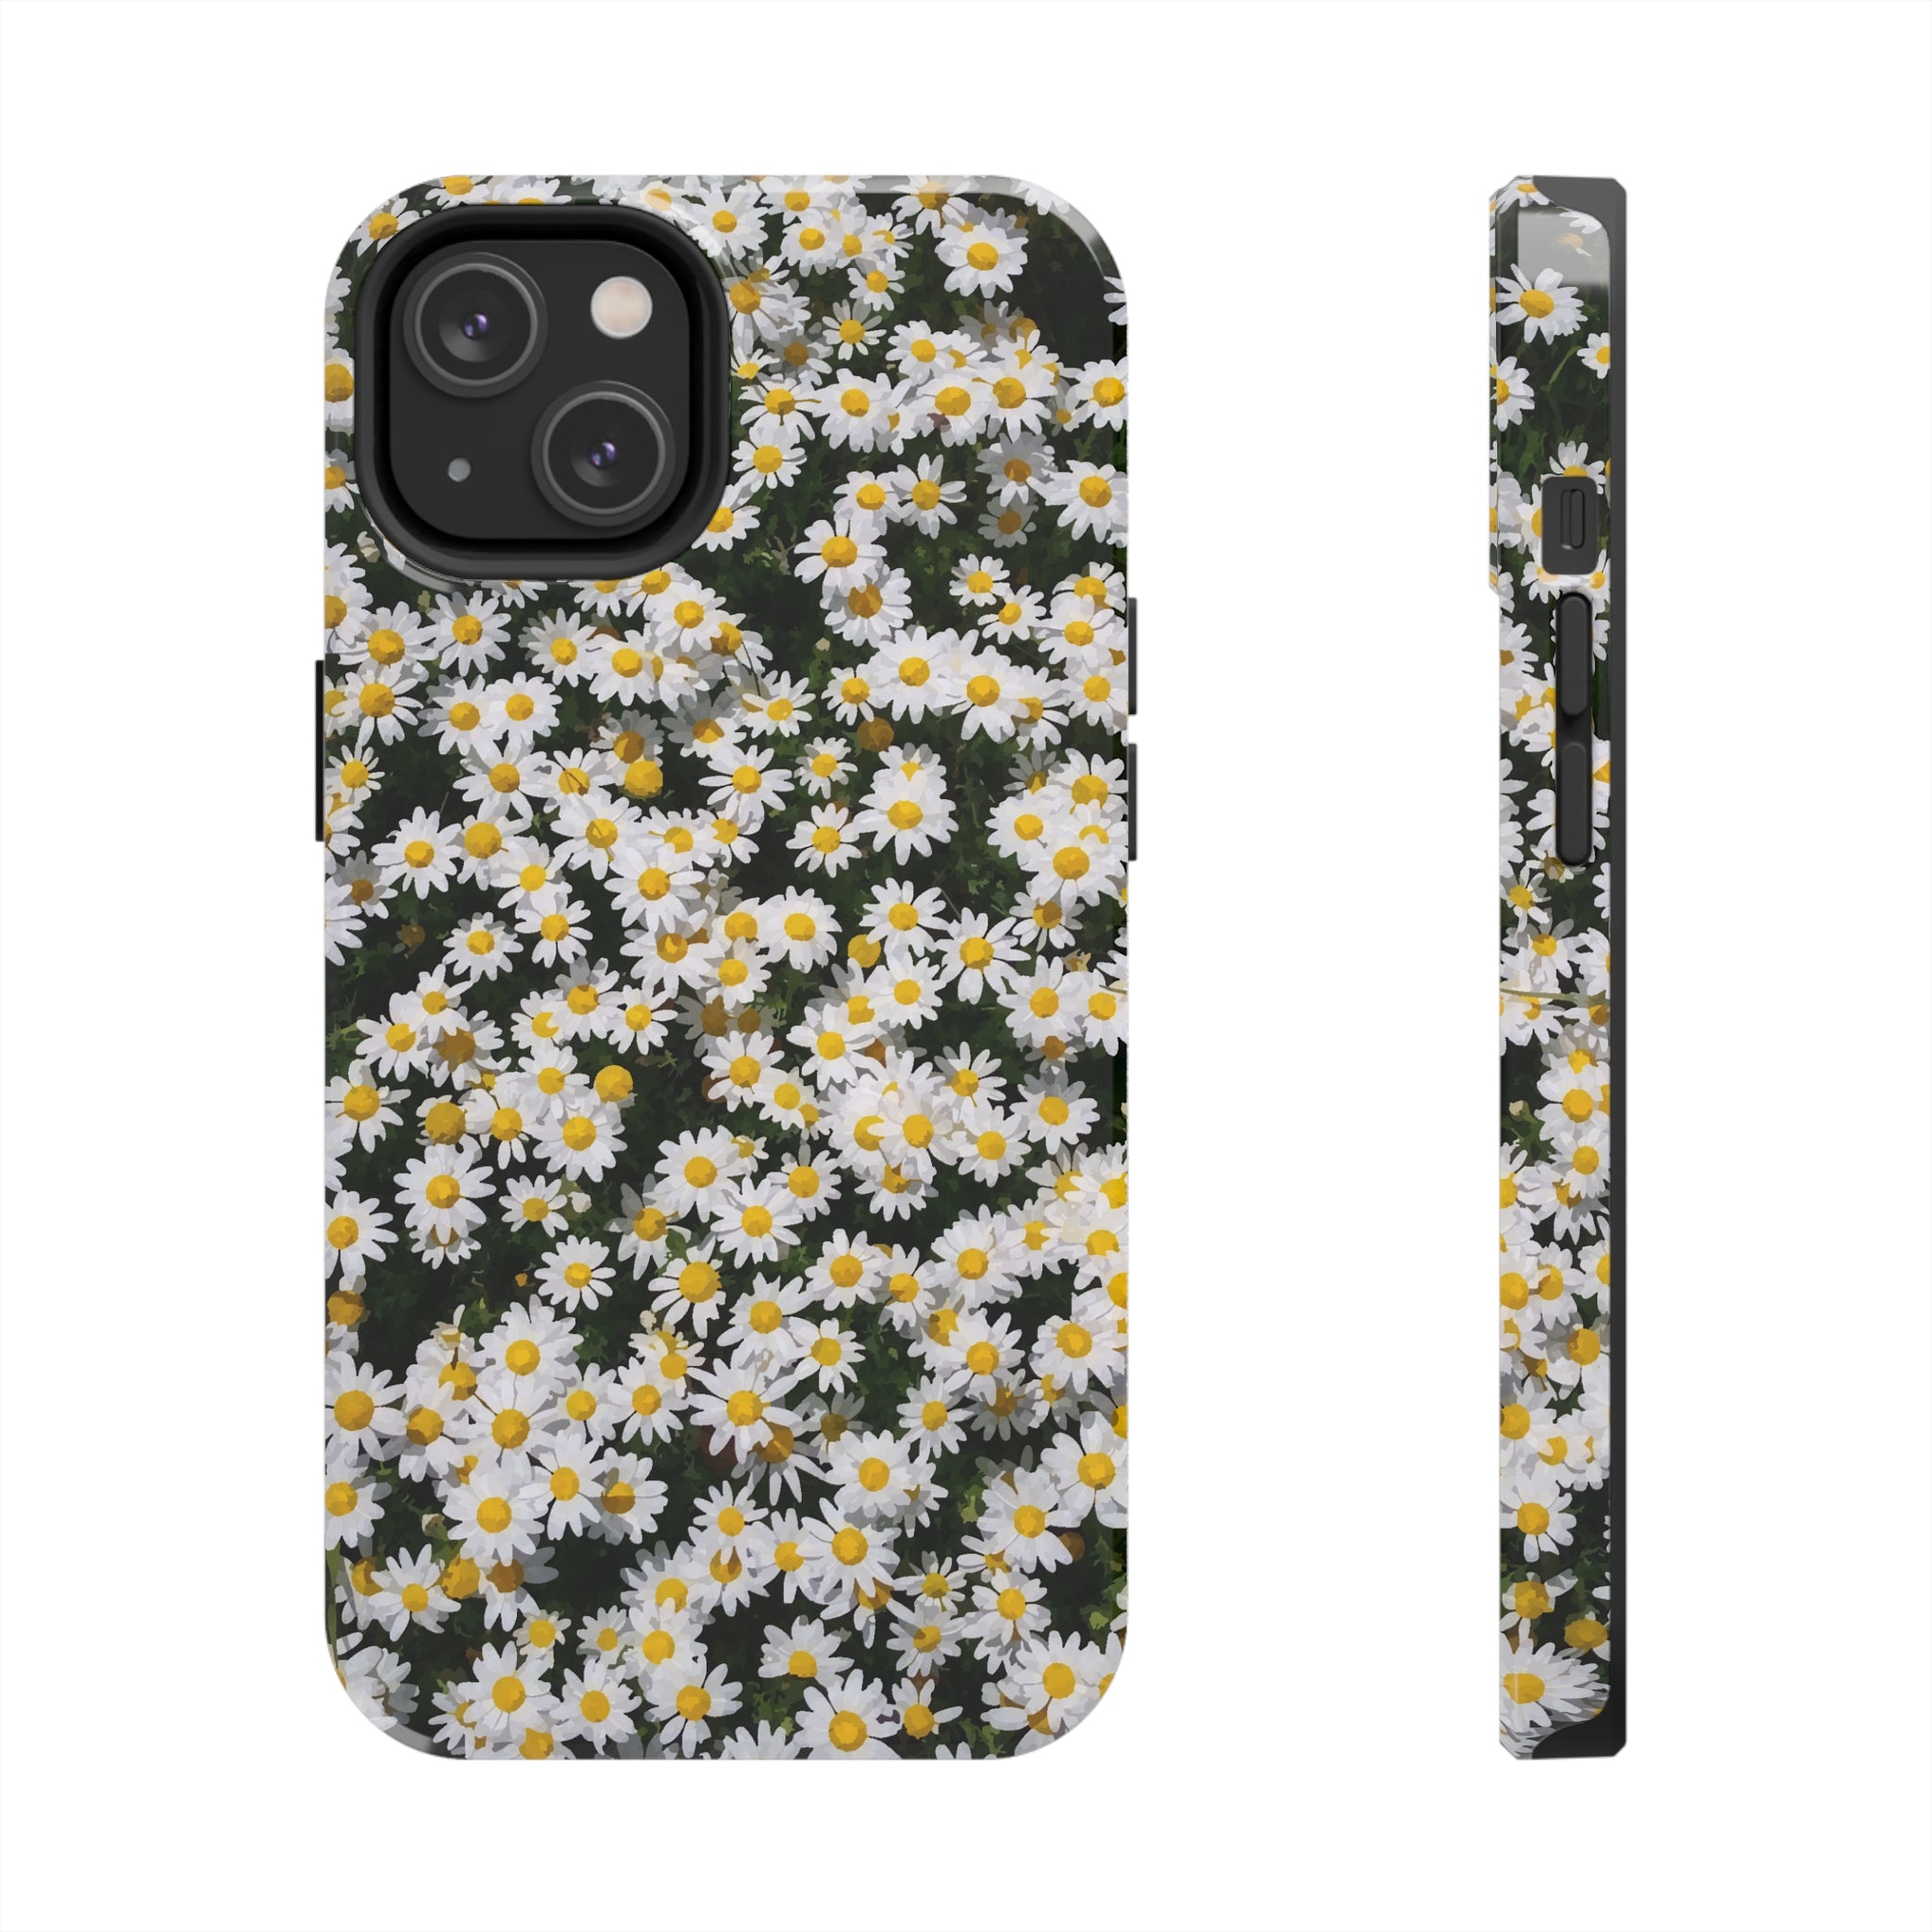 Main image of White Floral iPhone Case